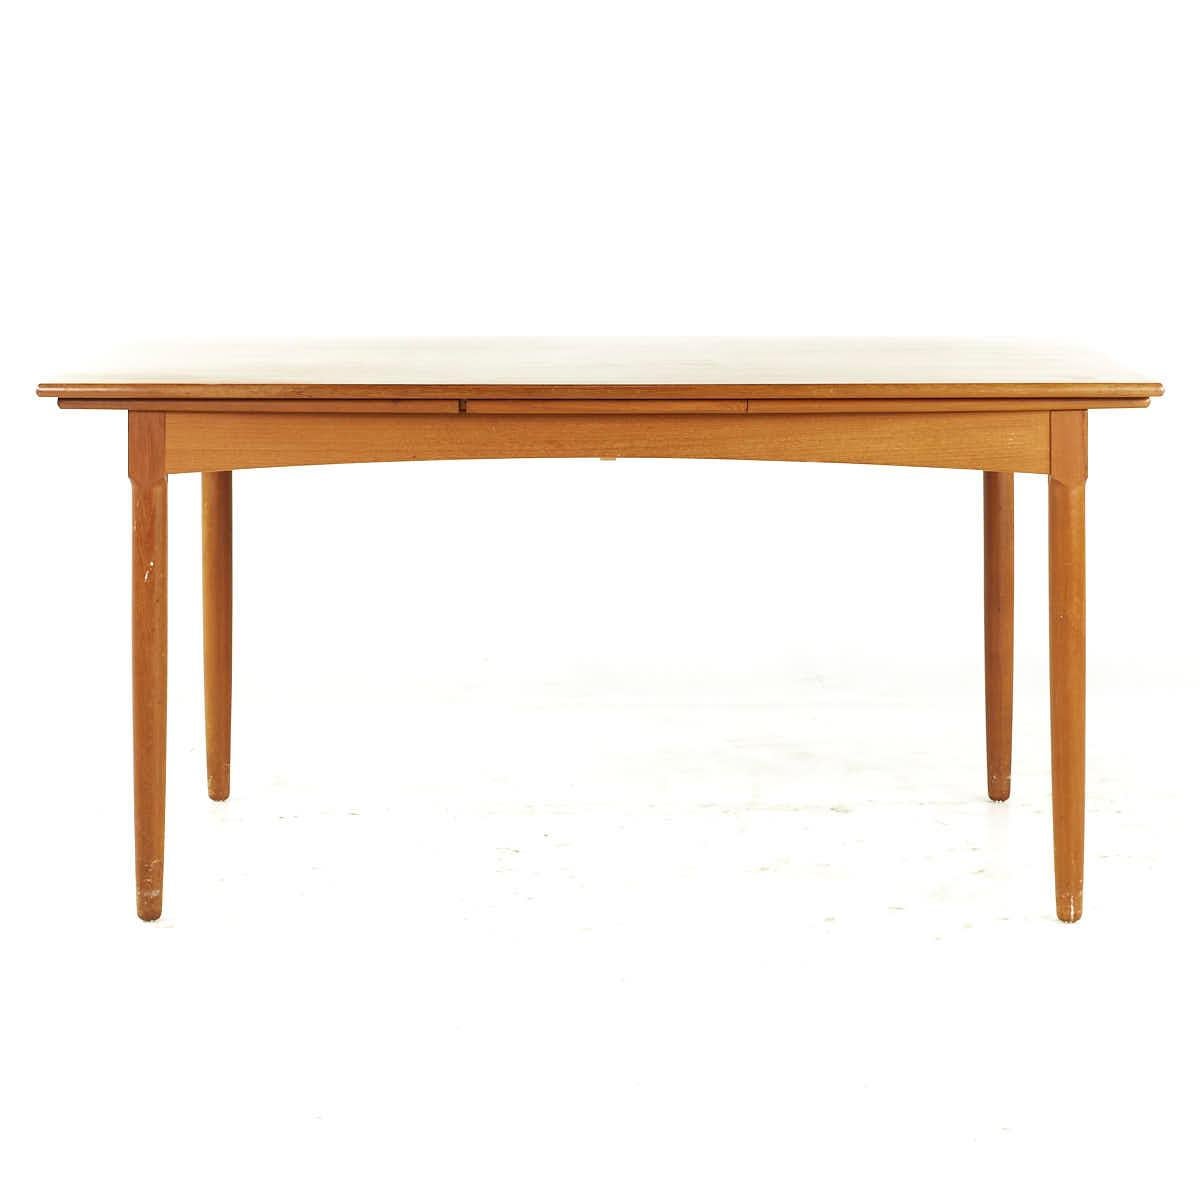 Kurt Ostervig Style Mid Century Teak Hidden Leaf Dining Table

This table measures: 60 wide x 39 deep x 29.25 high, with a chair clearance of 25 inches, each hidden leaf measures 21.75 inches, making a maximum table width of 103.5 inches when both